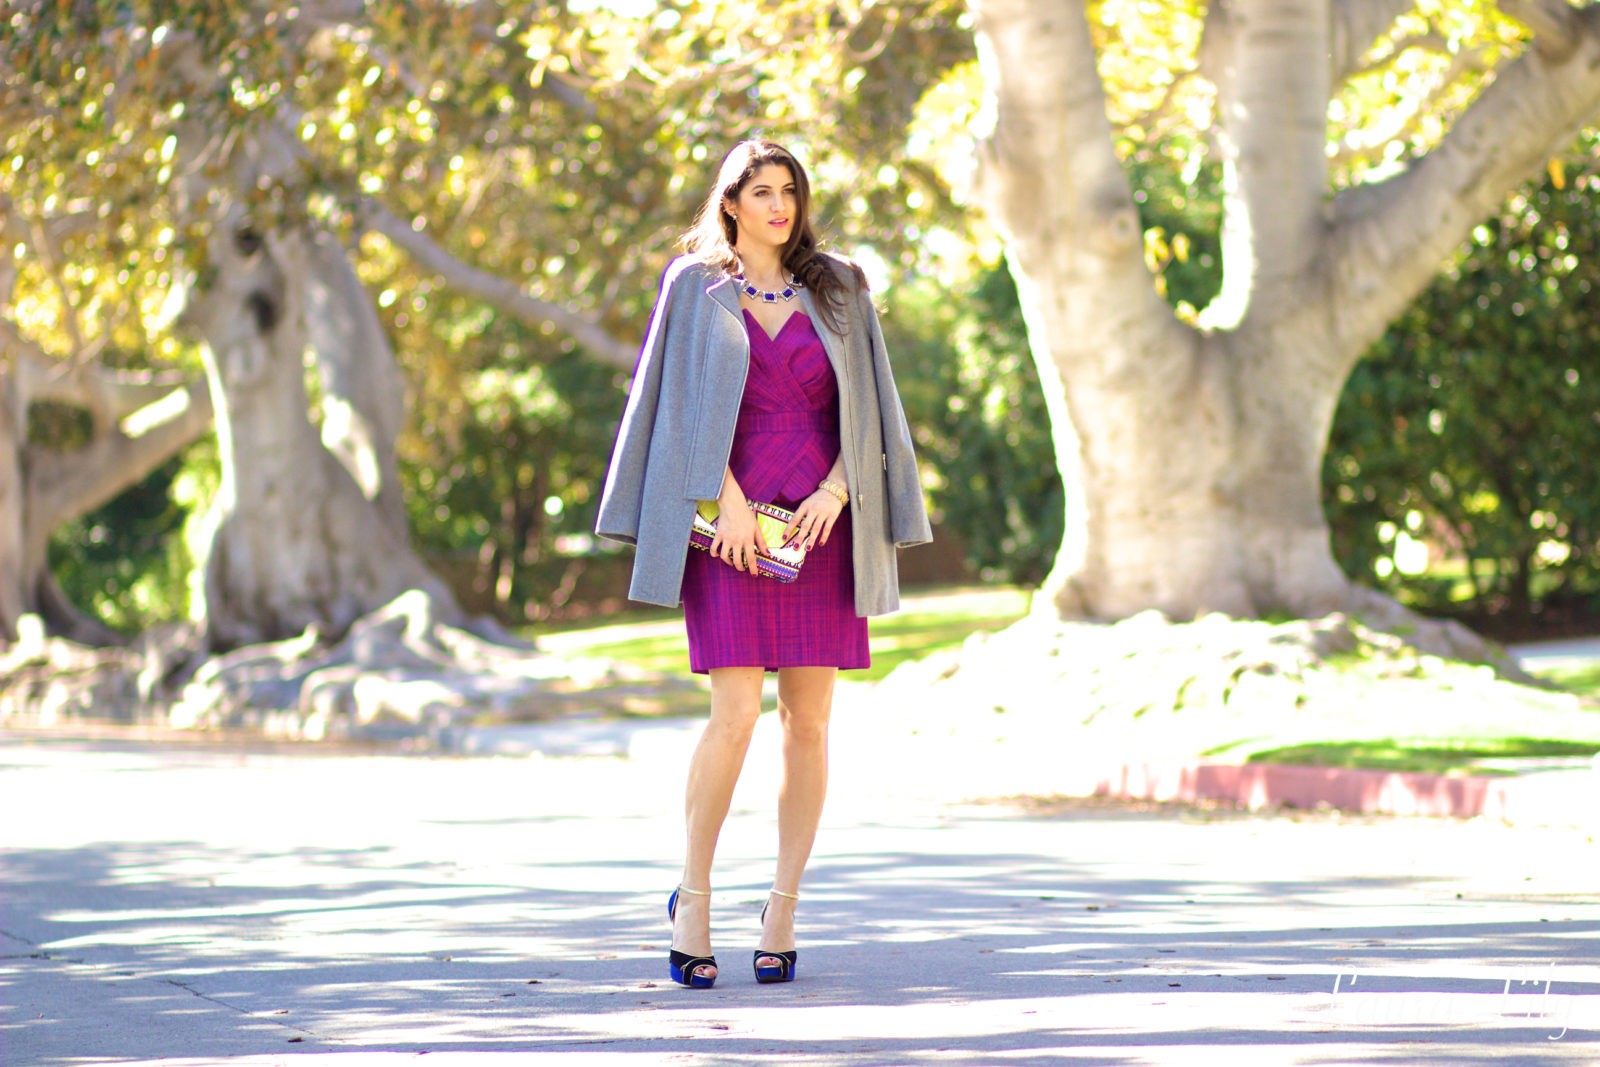 LA Fashion Blogger Laura Lily, holiday party outfit ideas, #12DaysofHolidayStyle, 1.State Boxy Topper Coat, Tweed and Peplum Trina Turk Dress, Sole Society statement necklace, Ivanka Trump Colorblock heels, holiday outfit ideas